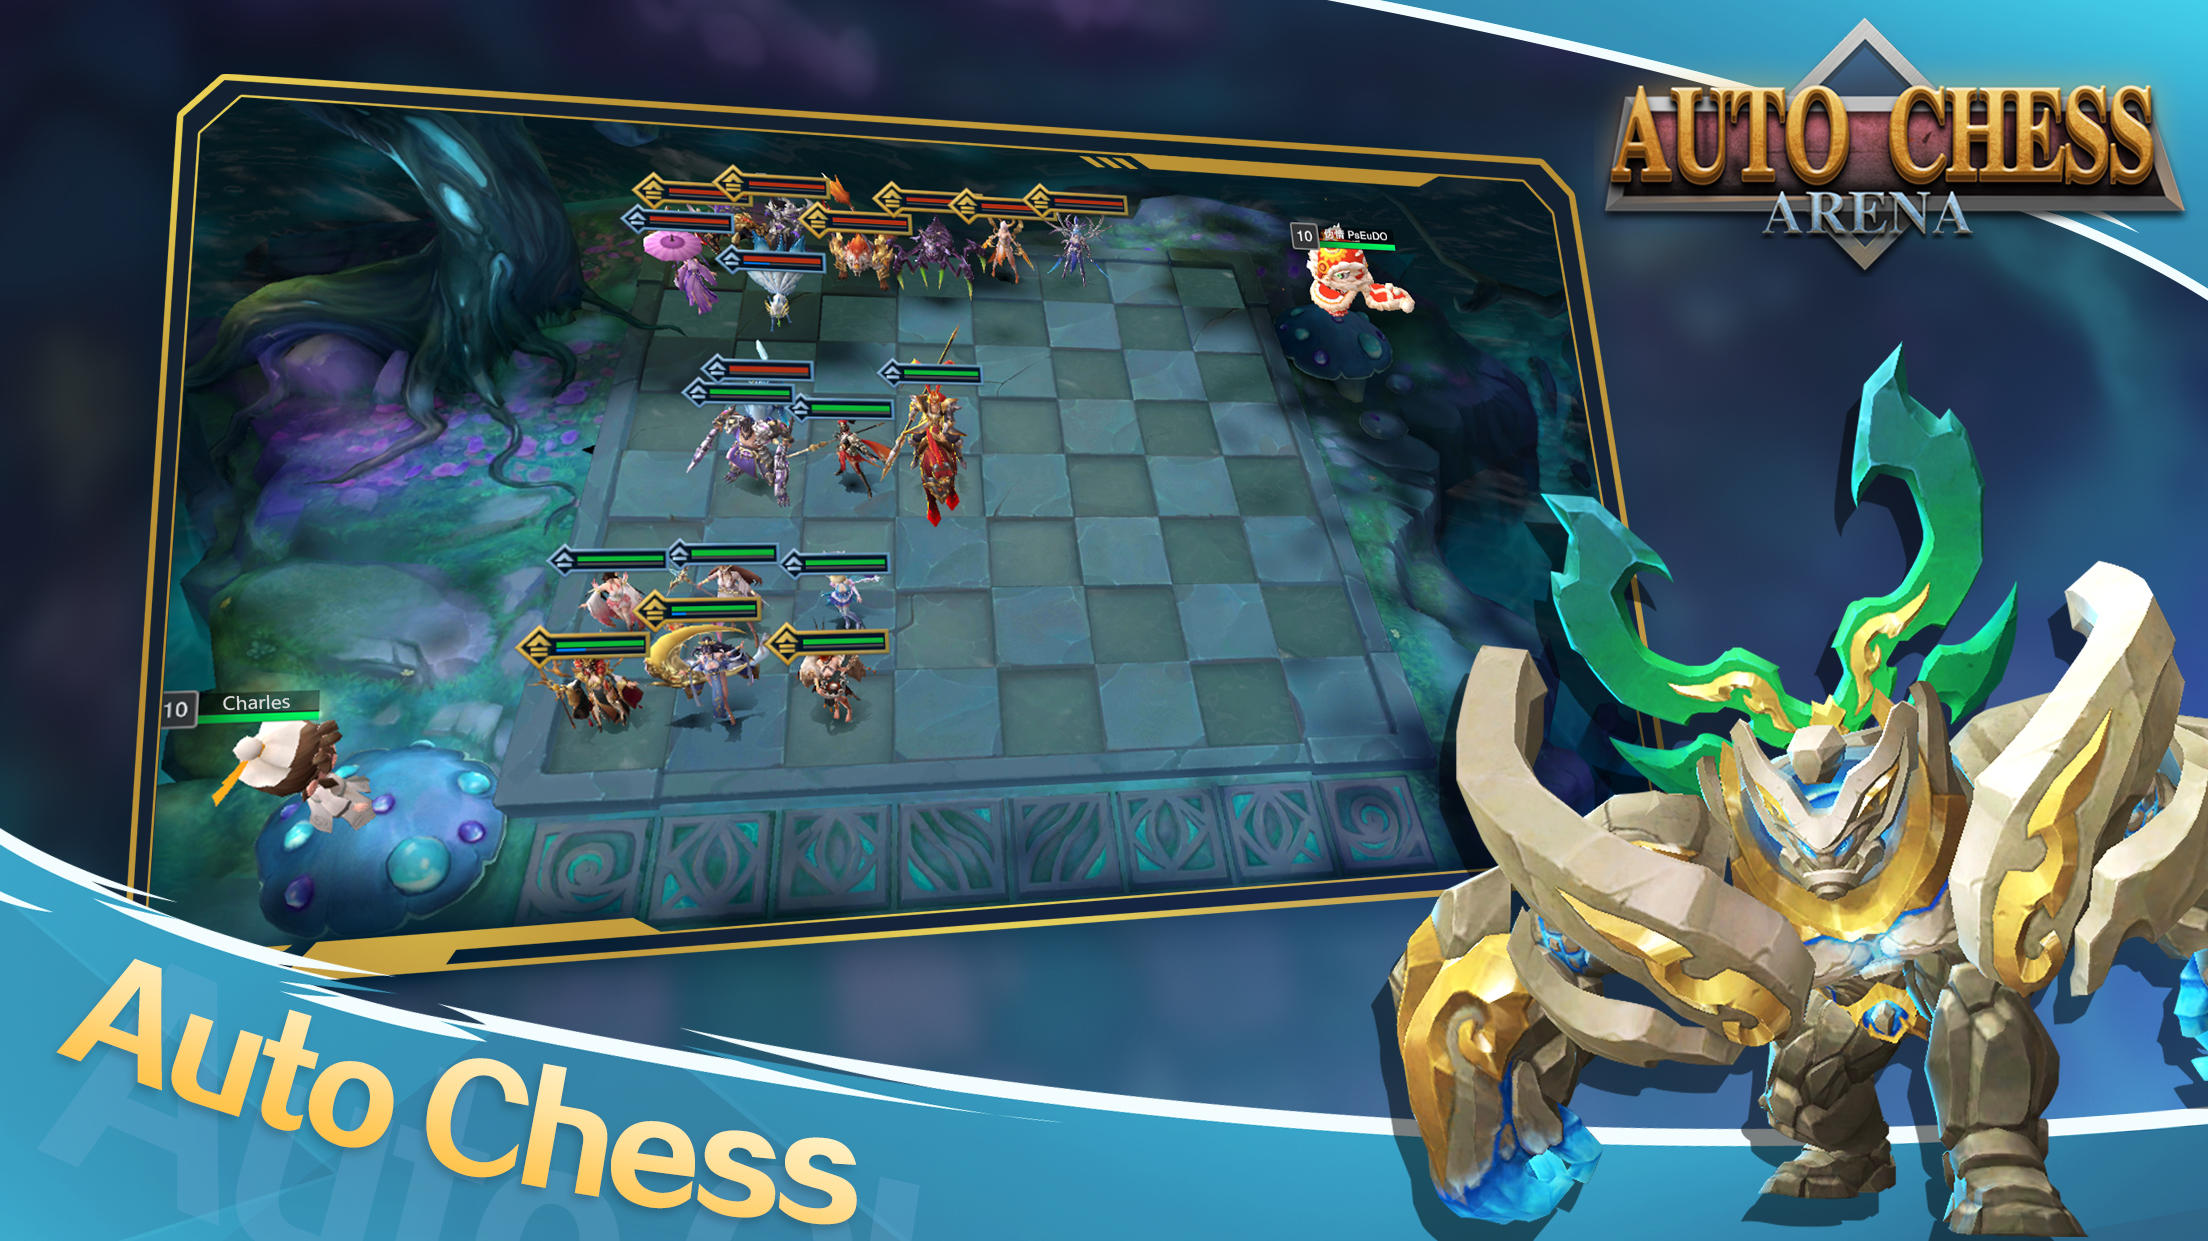 Auto Chess Defense - Mobile - APK Download for Android